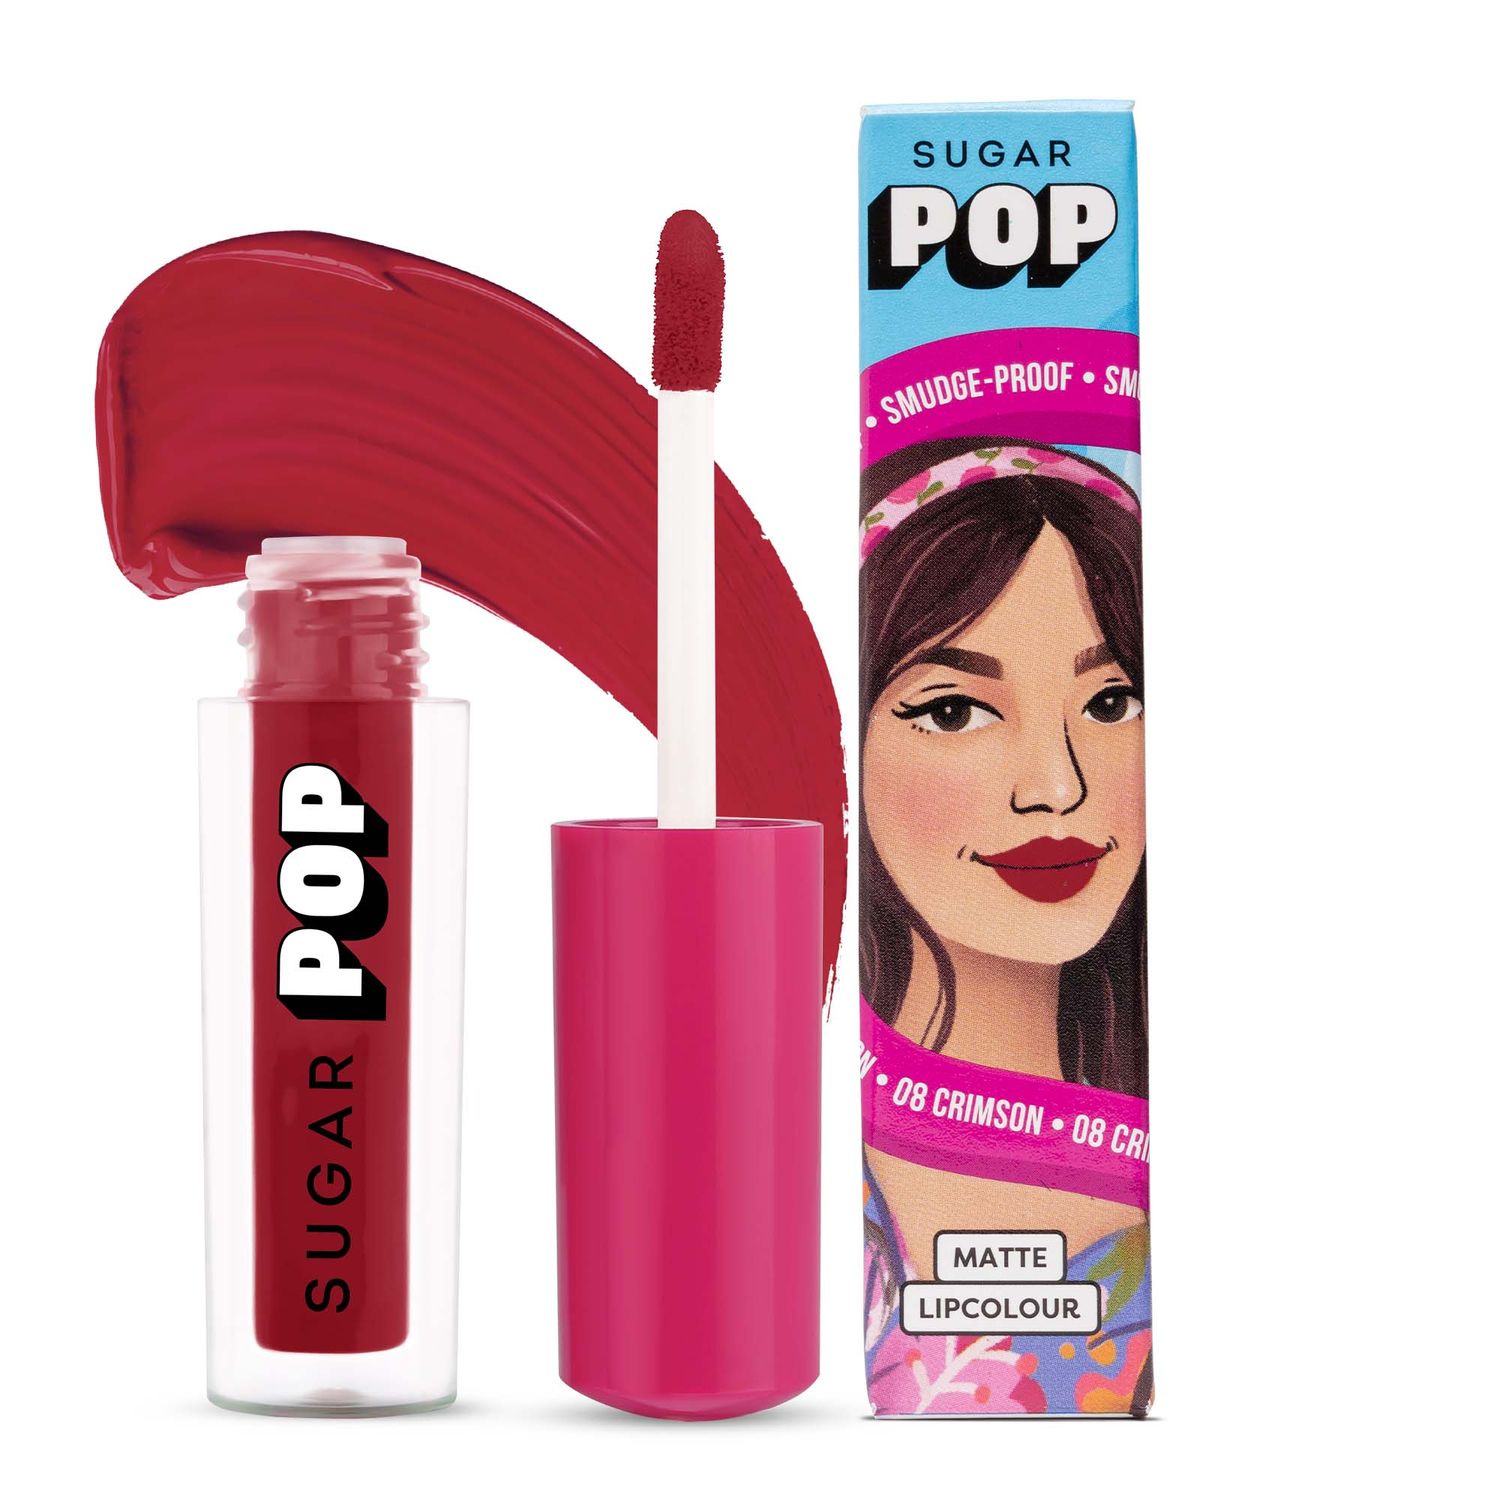 Buy SUGAR POP Matte Lipcolour - 08 Crimson (Dark Ruby) – 1.6 ml - Lasts Up to 8 hours l Ruby Lipstick for Women l Non-Drying, Smudge Proof, Long Lasting - Purplle